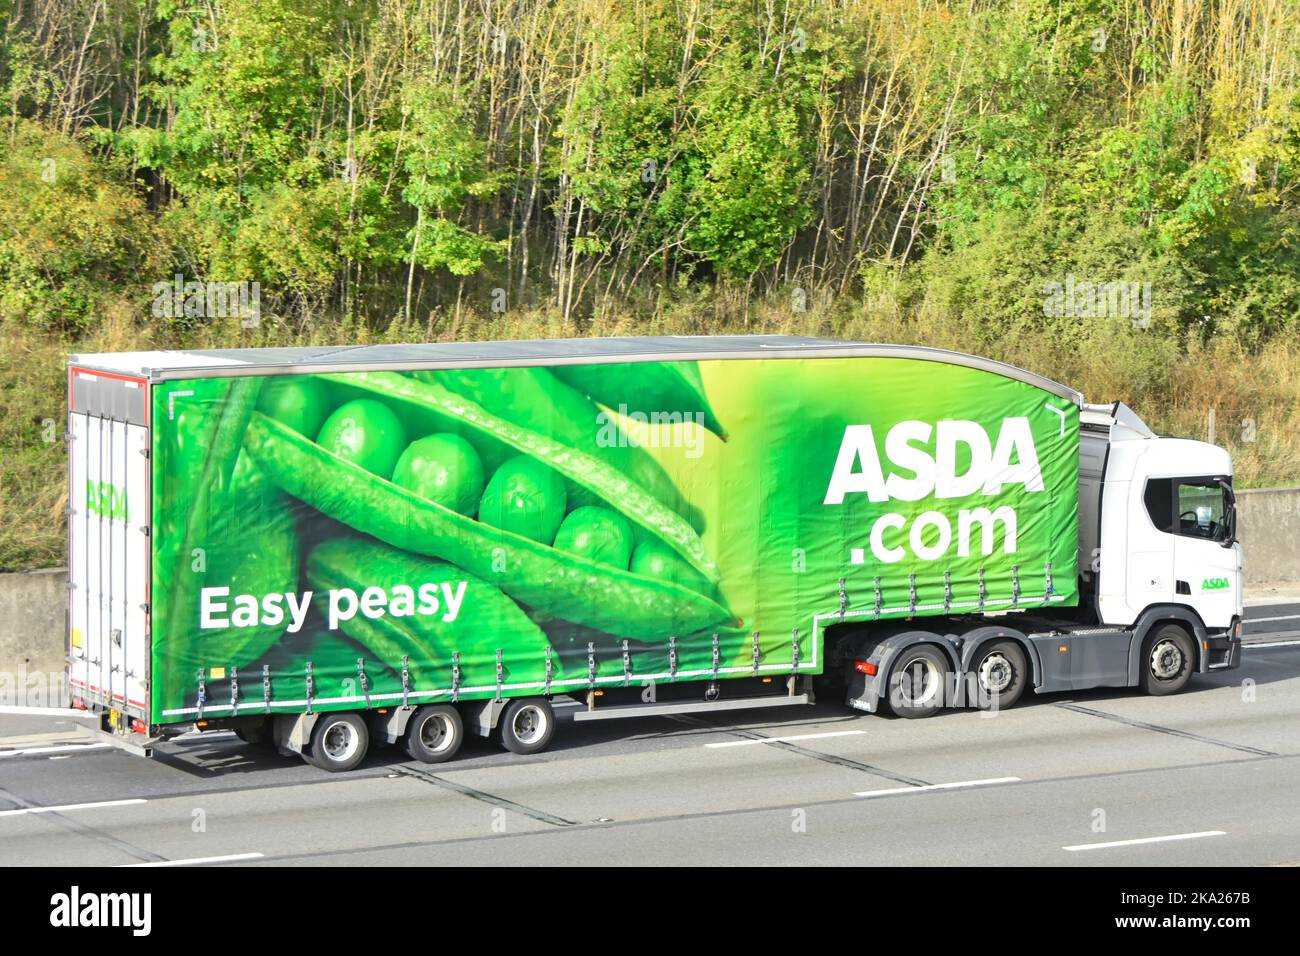 Easy peasy Asda supermarket Scania hgv lorry truck & green pea pod advertising graphic side curtain view articulated trailer driving UK motorway road Stock Photo